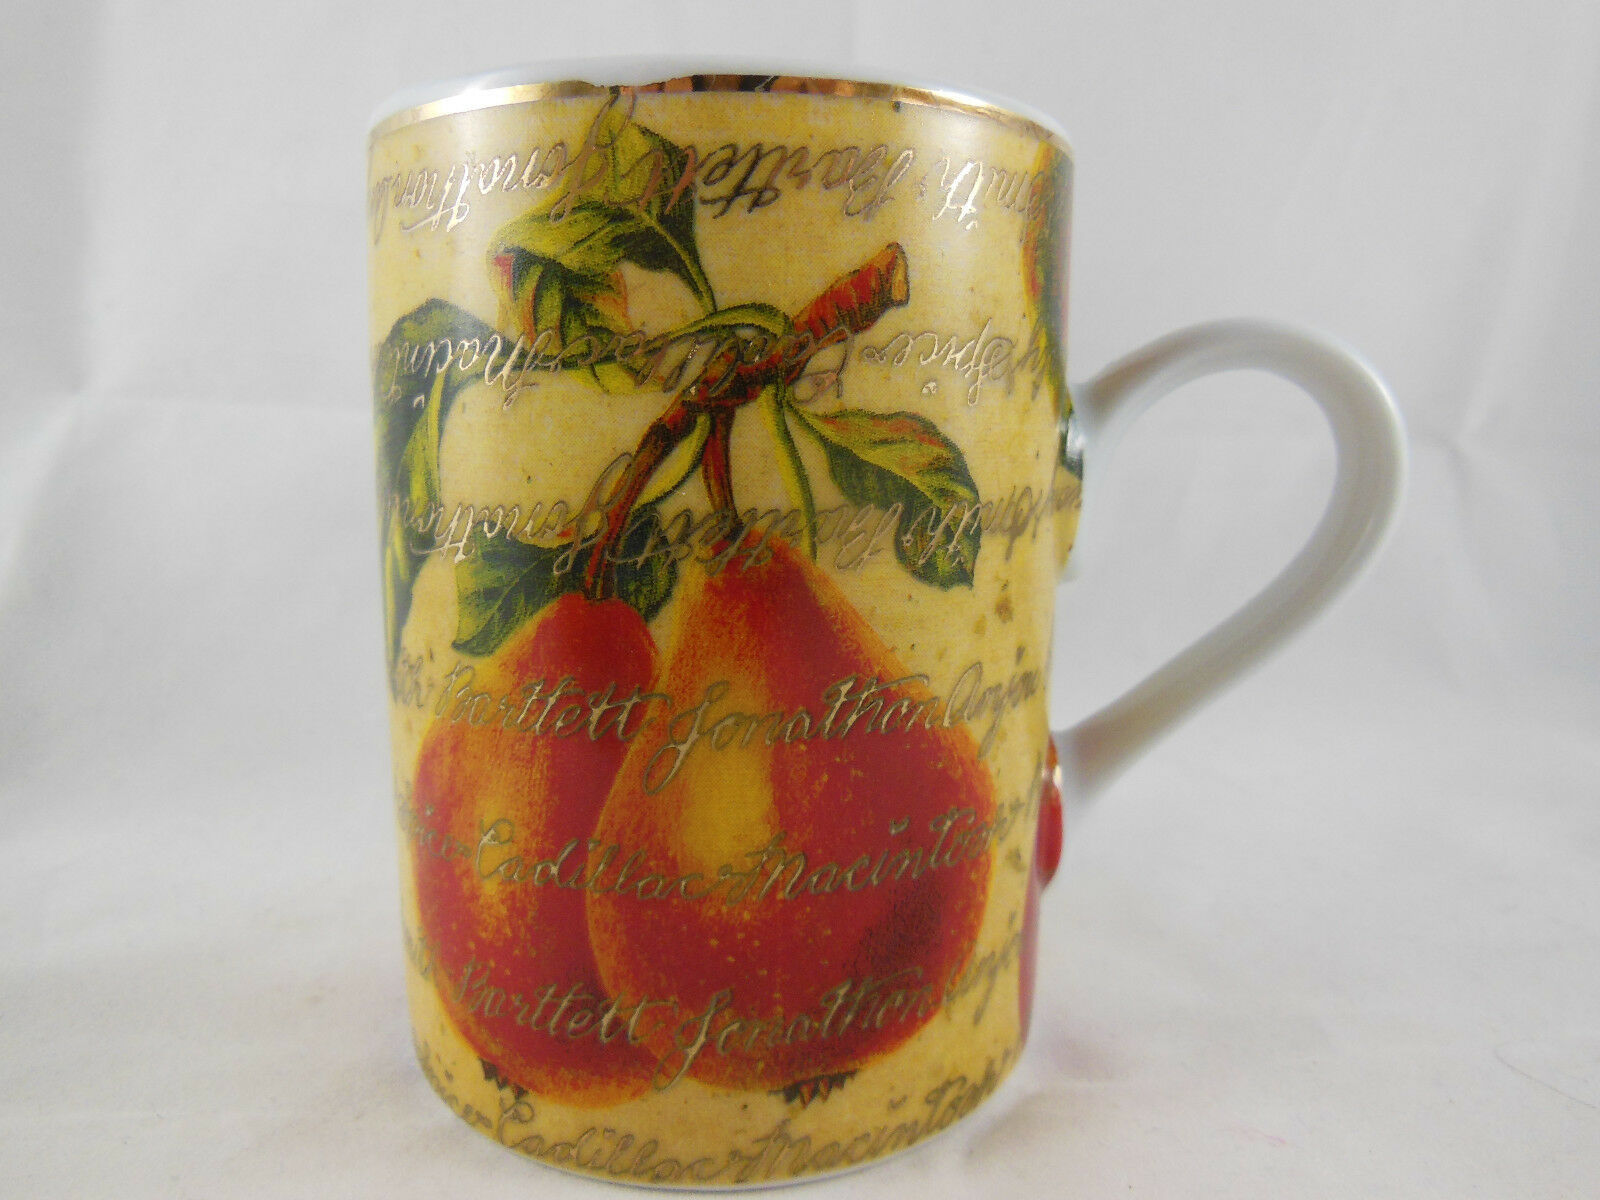 Department 56 Mug Pears and Apples Coffee Tea cup 8 Oz Gold Red Yellow - $6.33